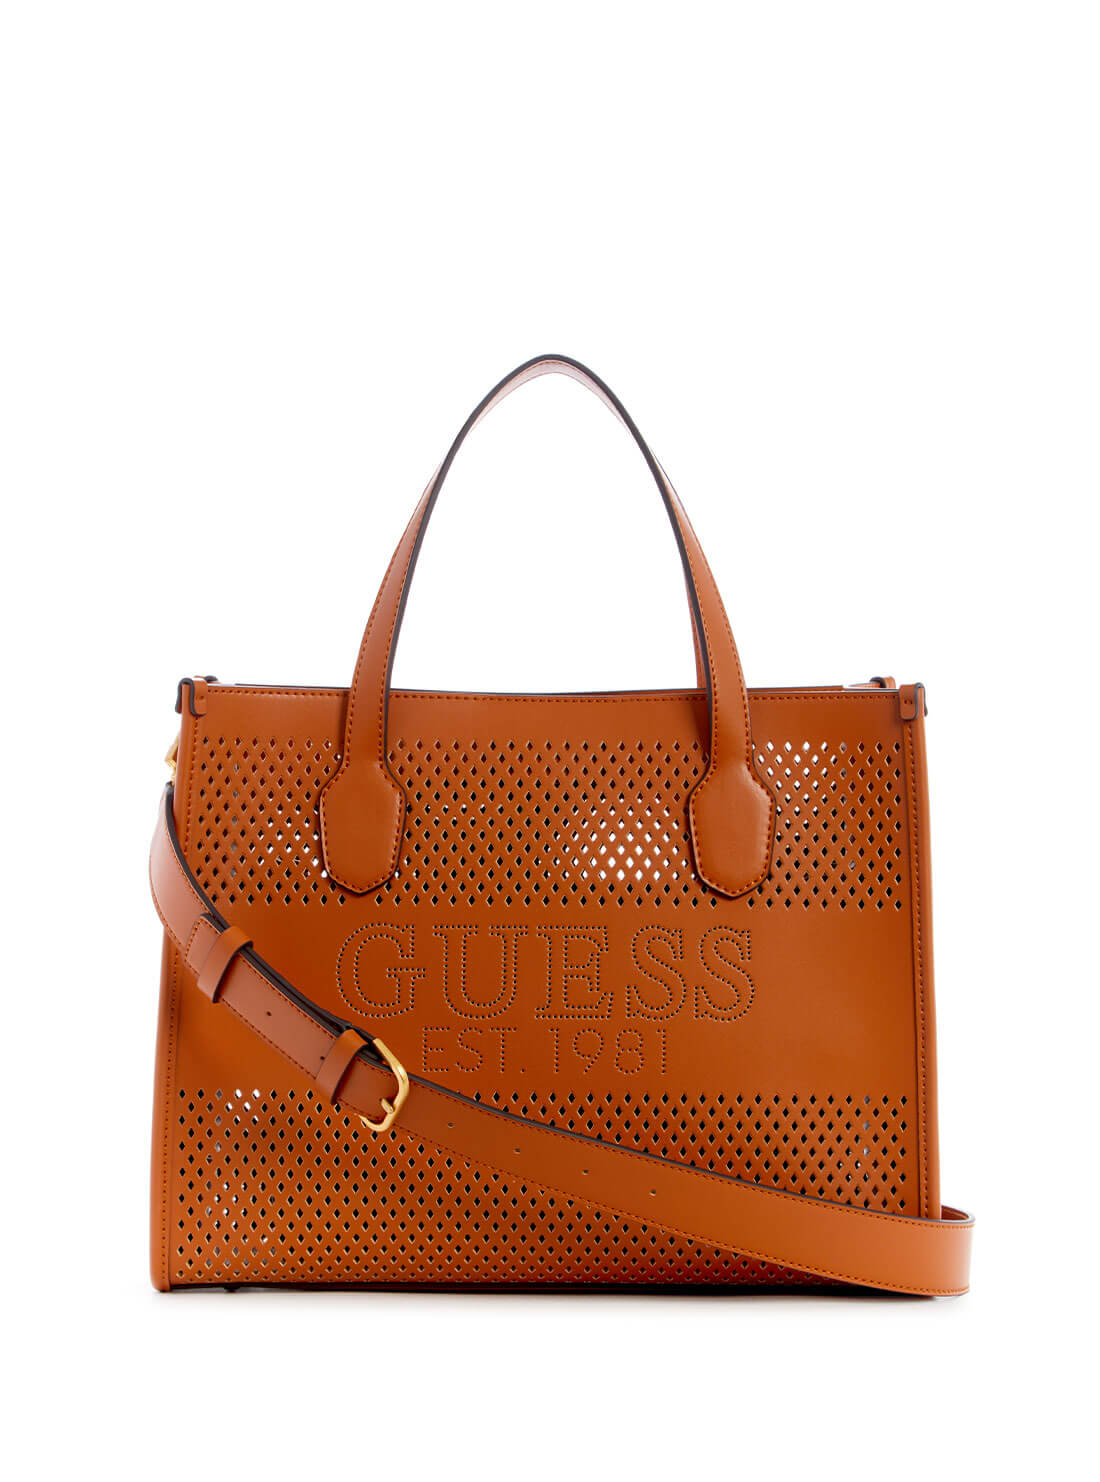 Cognac Brown Katey Small Tote Bag | GUESS Women's Handbags | front view